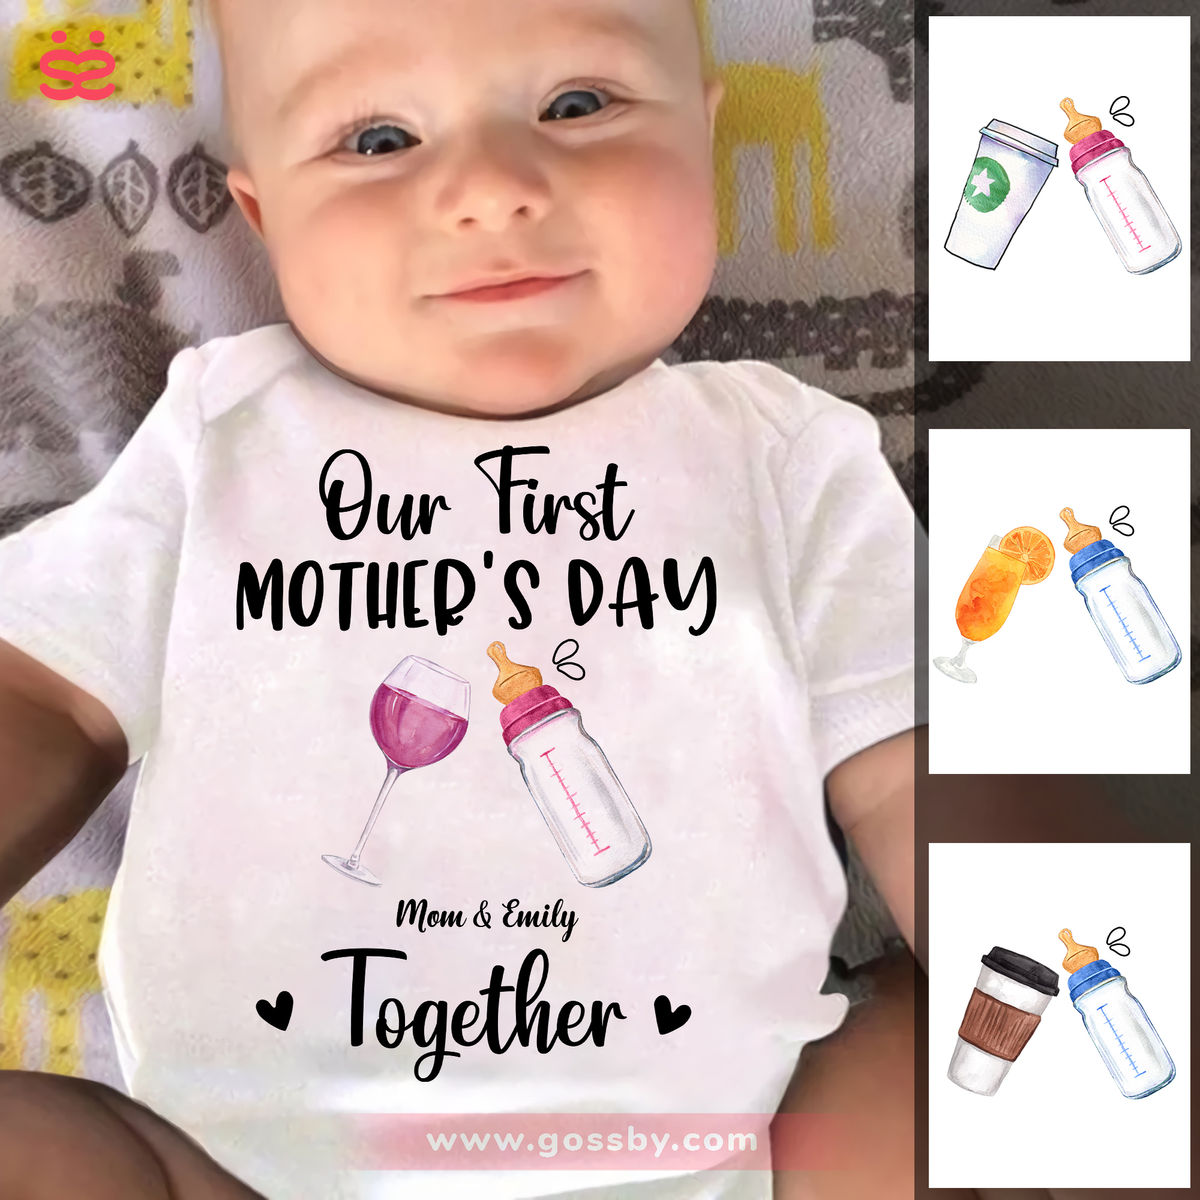 Custom Baby Onesies - Our First Mother's Day Together - Baby Shower Gift - Personalized Shirt